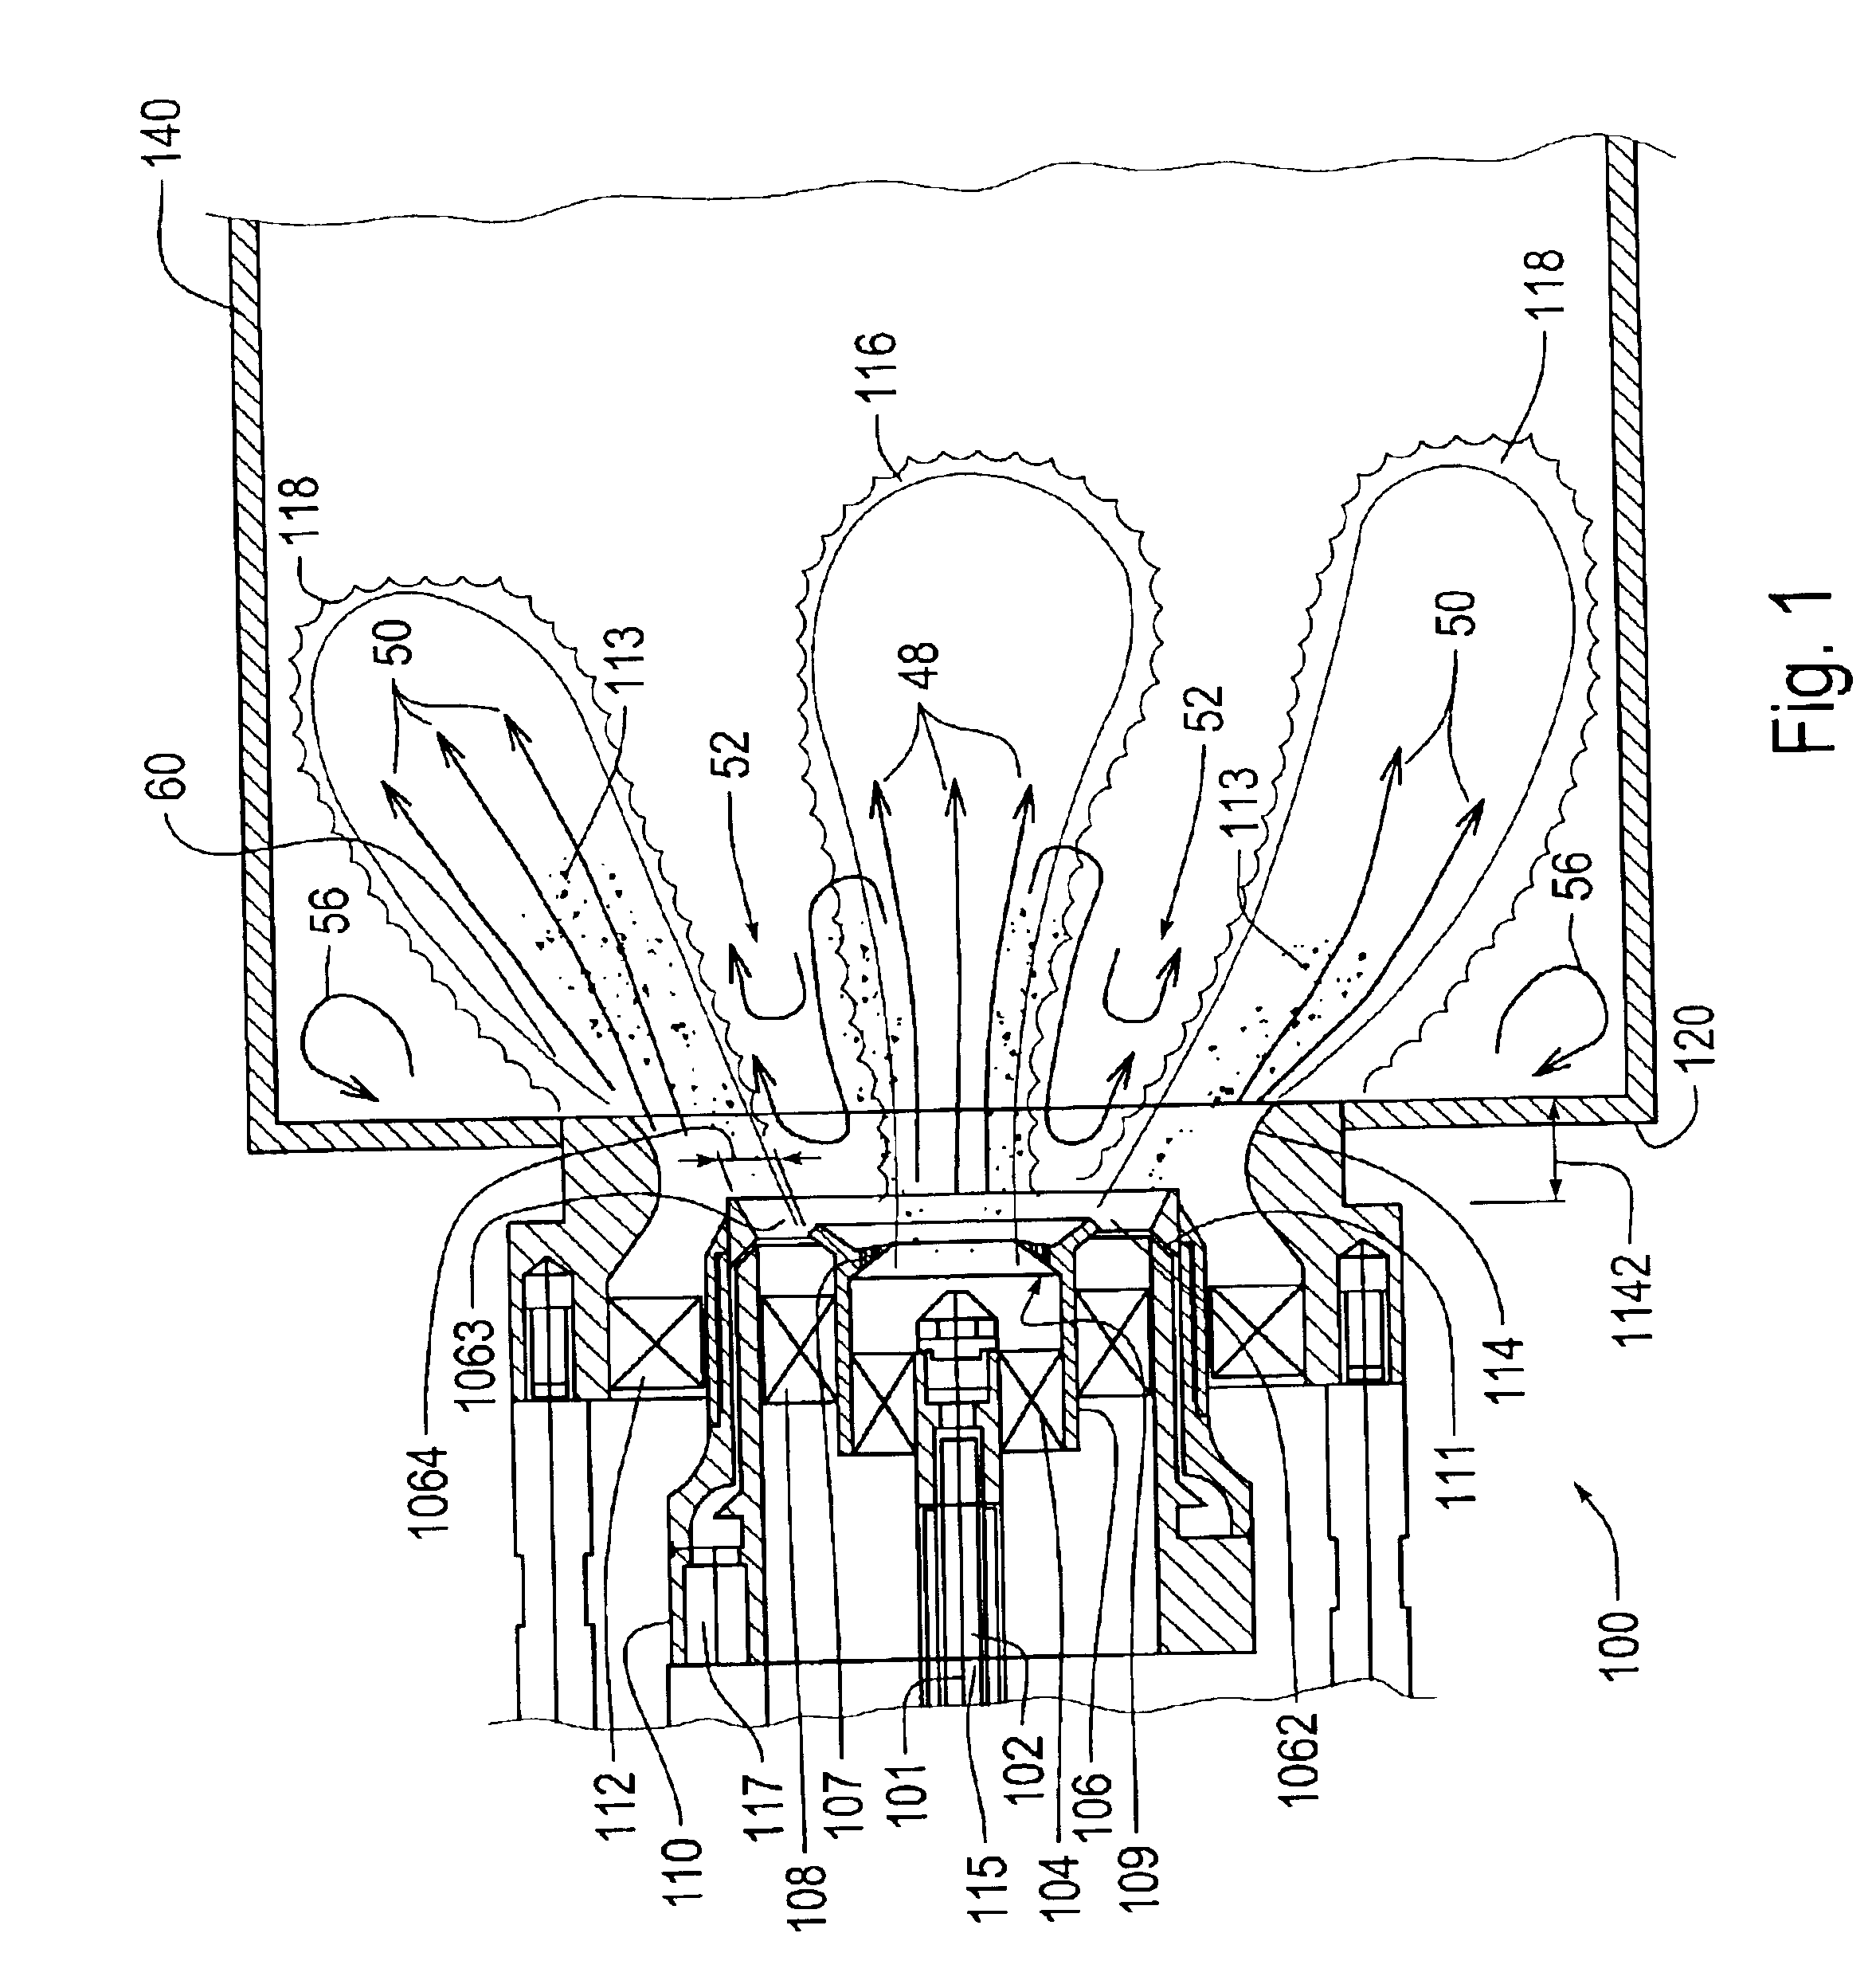 Piloted airblast lean direct fuel injector with modified air splitter